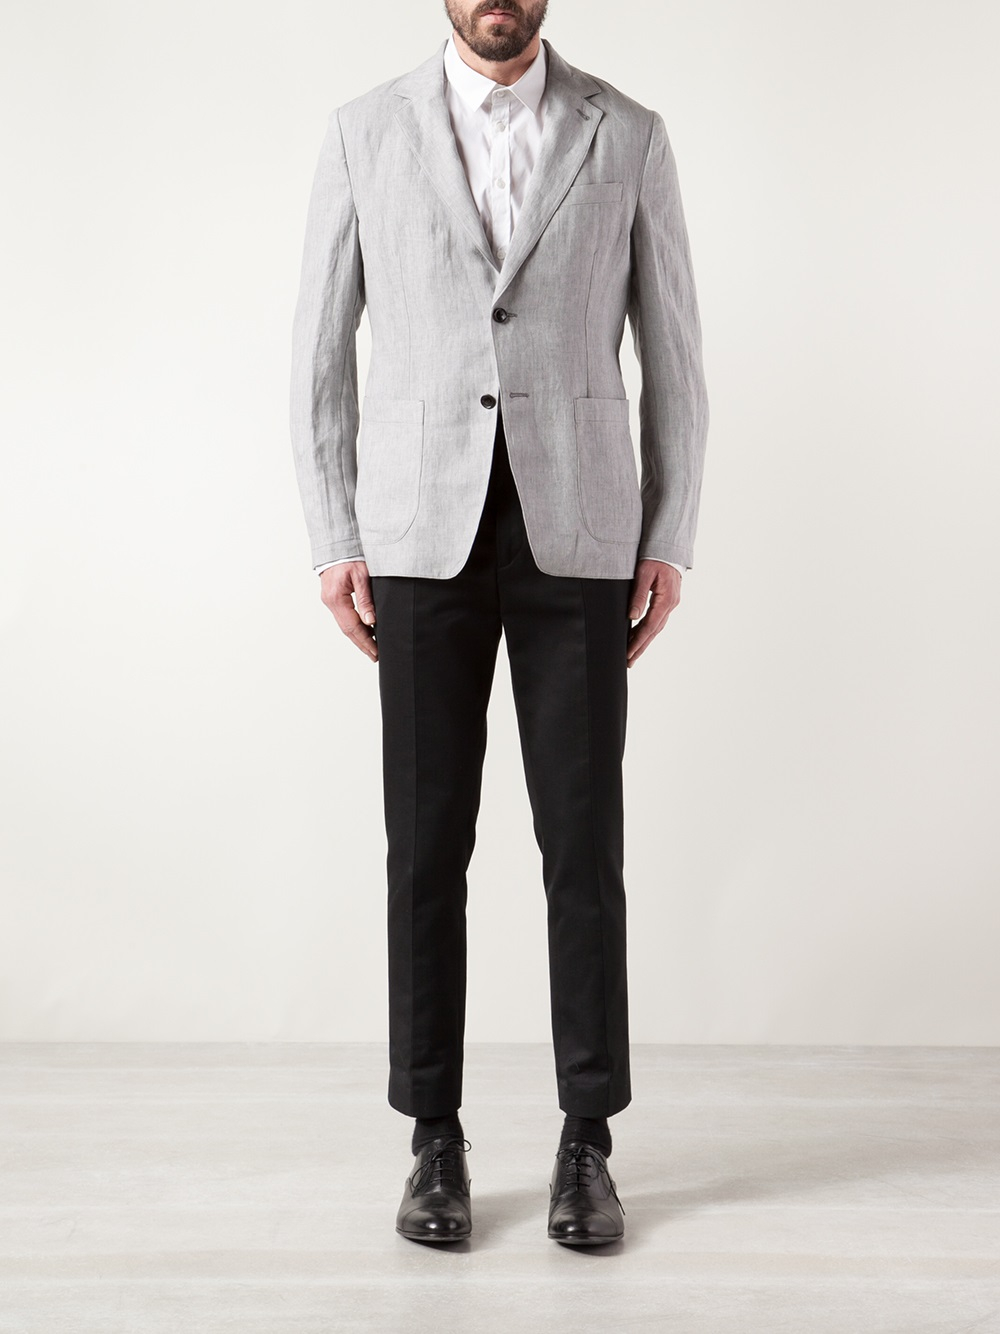 Lyst - Our Legacy 2b Unconstructed Blazer in Gray for Men